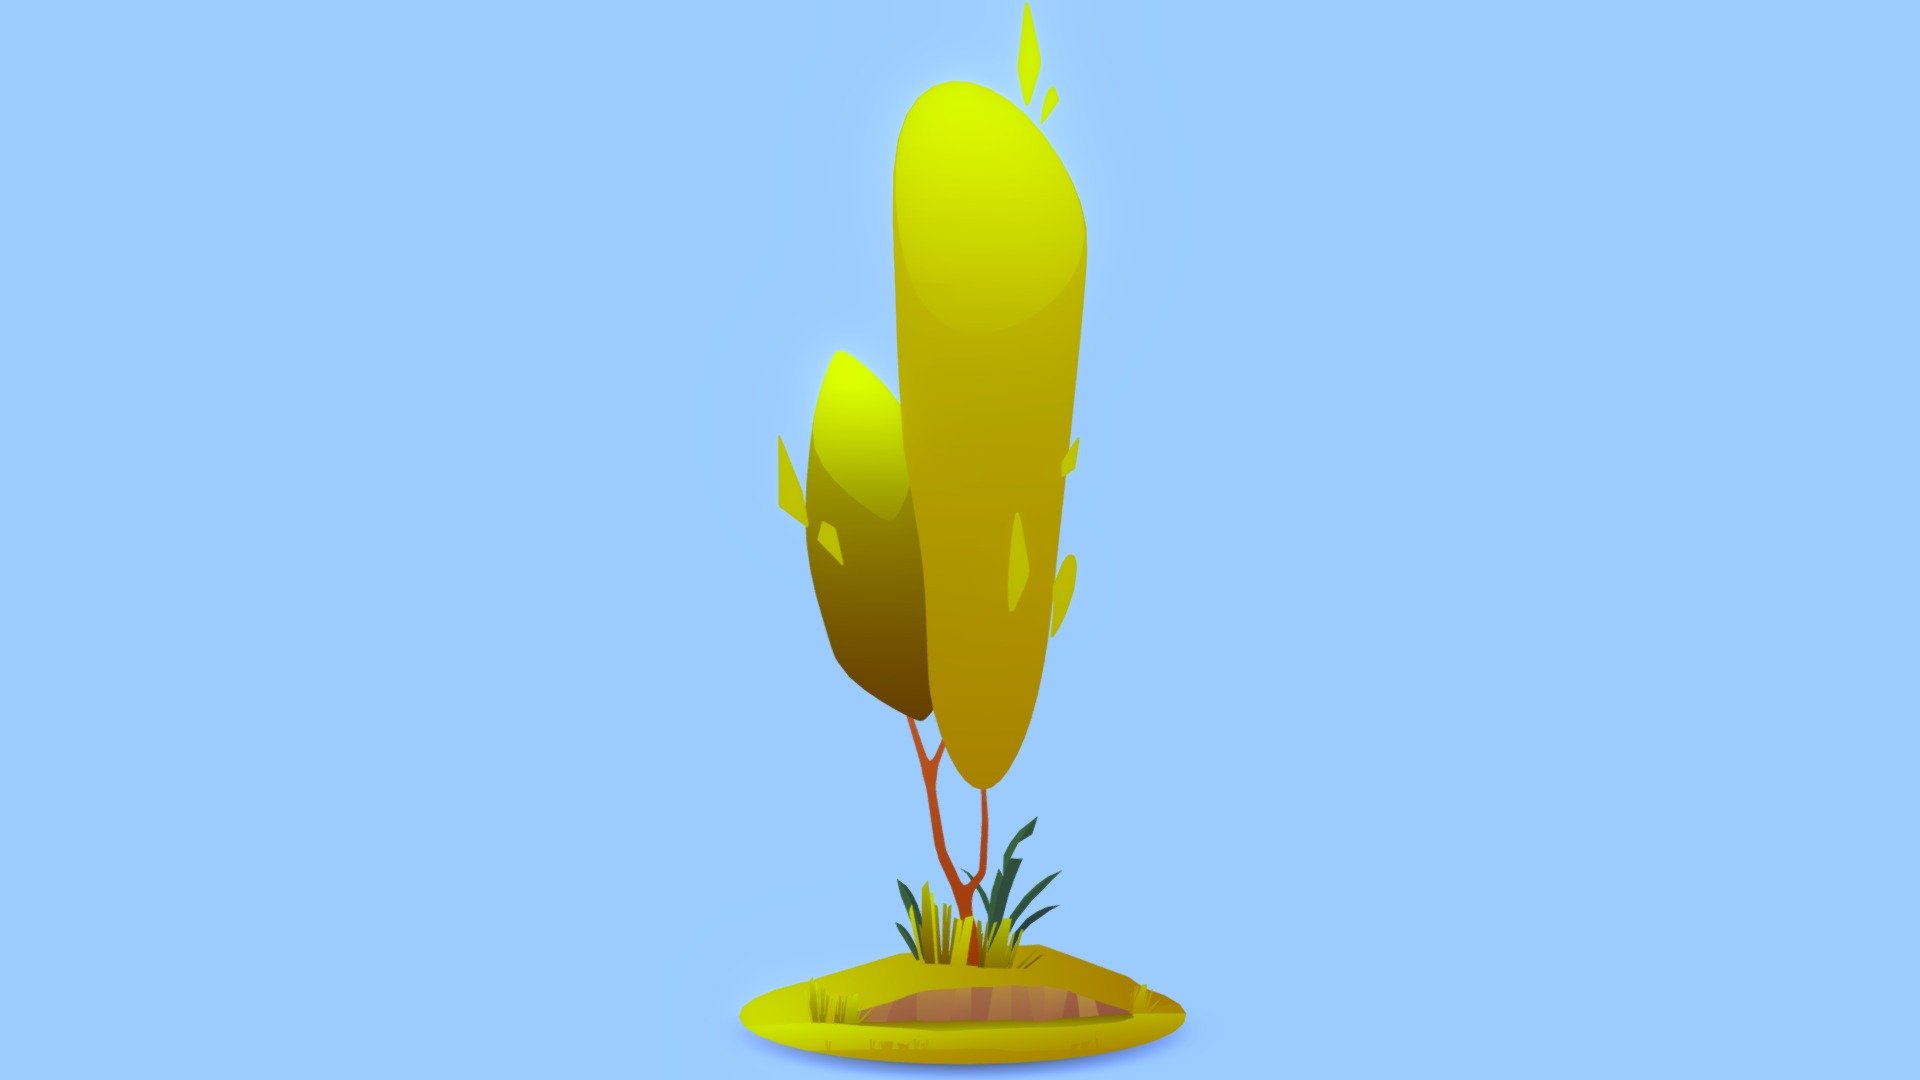 stylized unlit little tree.

Textured with gradient atlas, so it is performant for mobile games and video games.

Like a few of my other assets
in the same style, it uses a single texture diffuse map and is mapped using only color gradients. 
All gradient textures can be extended and combined to a large atlas.

There are more assets in this style to add to your game scene or environment. Check out my sale.

If you want to change the colors of the assets, you just need to move the UVs on the atlas to a different gradient.
Or contact me for changes, for a small fee.

I also accept freelance jobs. Do not hesitate to write me. 

*-------------Terms of Use--------------

Commercial use of the assets  provided is permitted but cannot be included in an asset pack or sold at any sort of asset/resource marketplace.* - Stylized Tree - Buy Royalty Free 3D model by Stylized Box (@Stylized_Box) 3d model